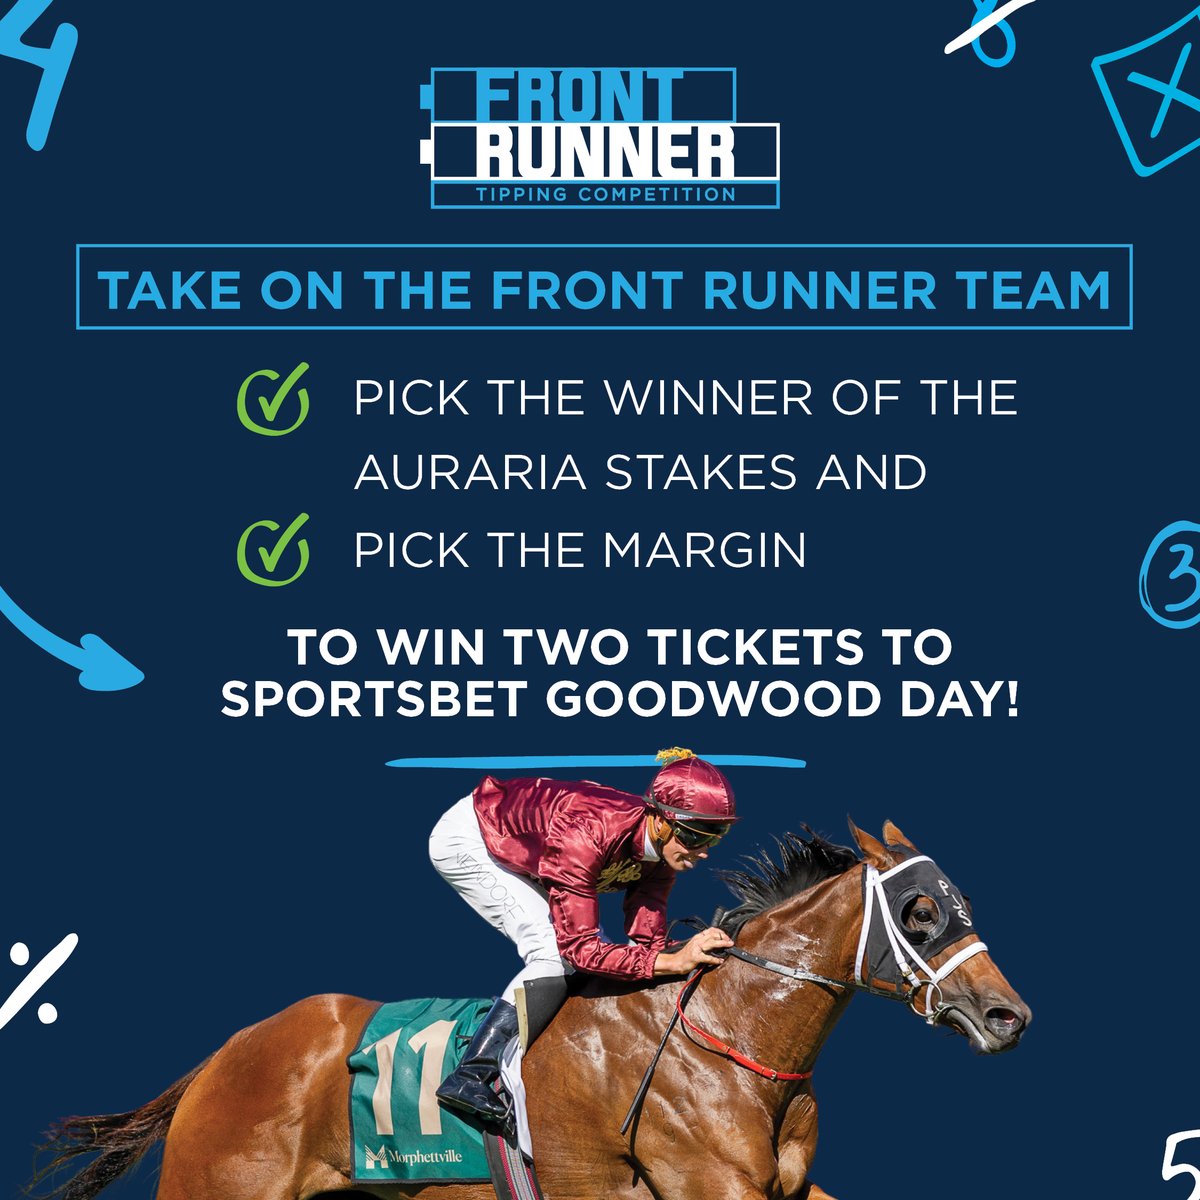 Pick the winner of the Auraria Stakes & pick the margin, for your chance to win 2x hospitality tickets to Sportsbet Goodwood Day! Enter by commenting below ⬇️